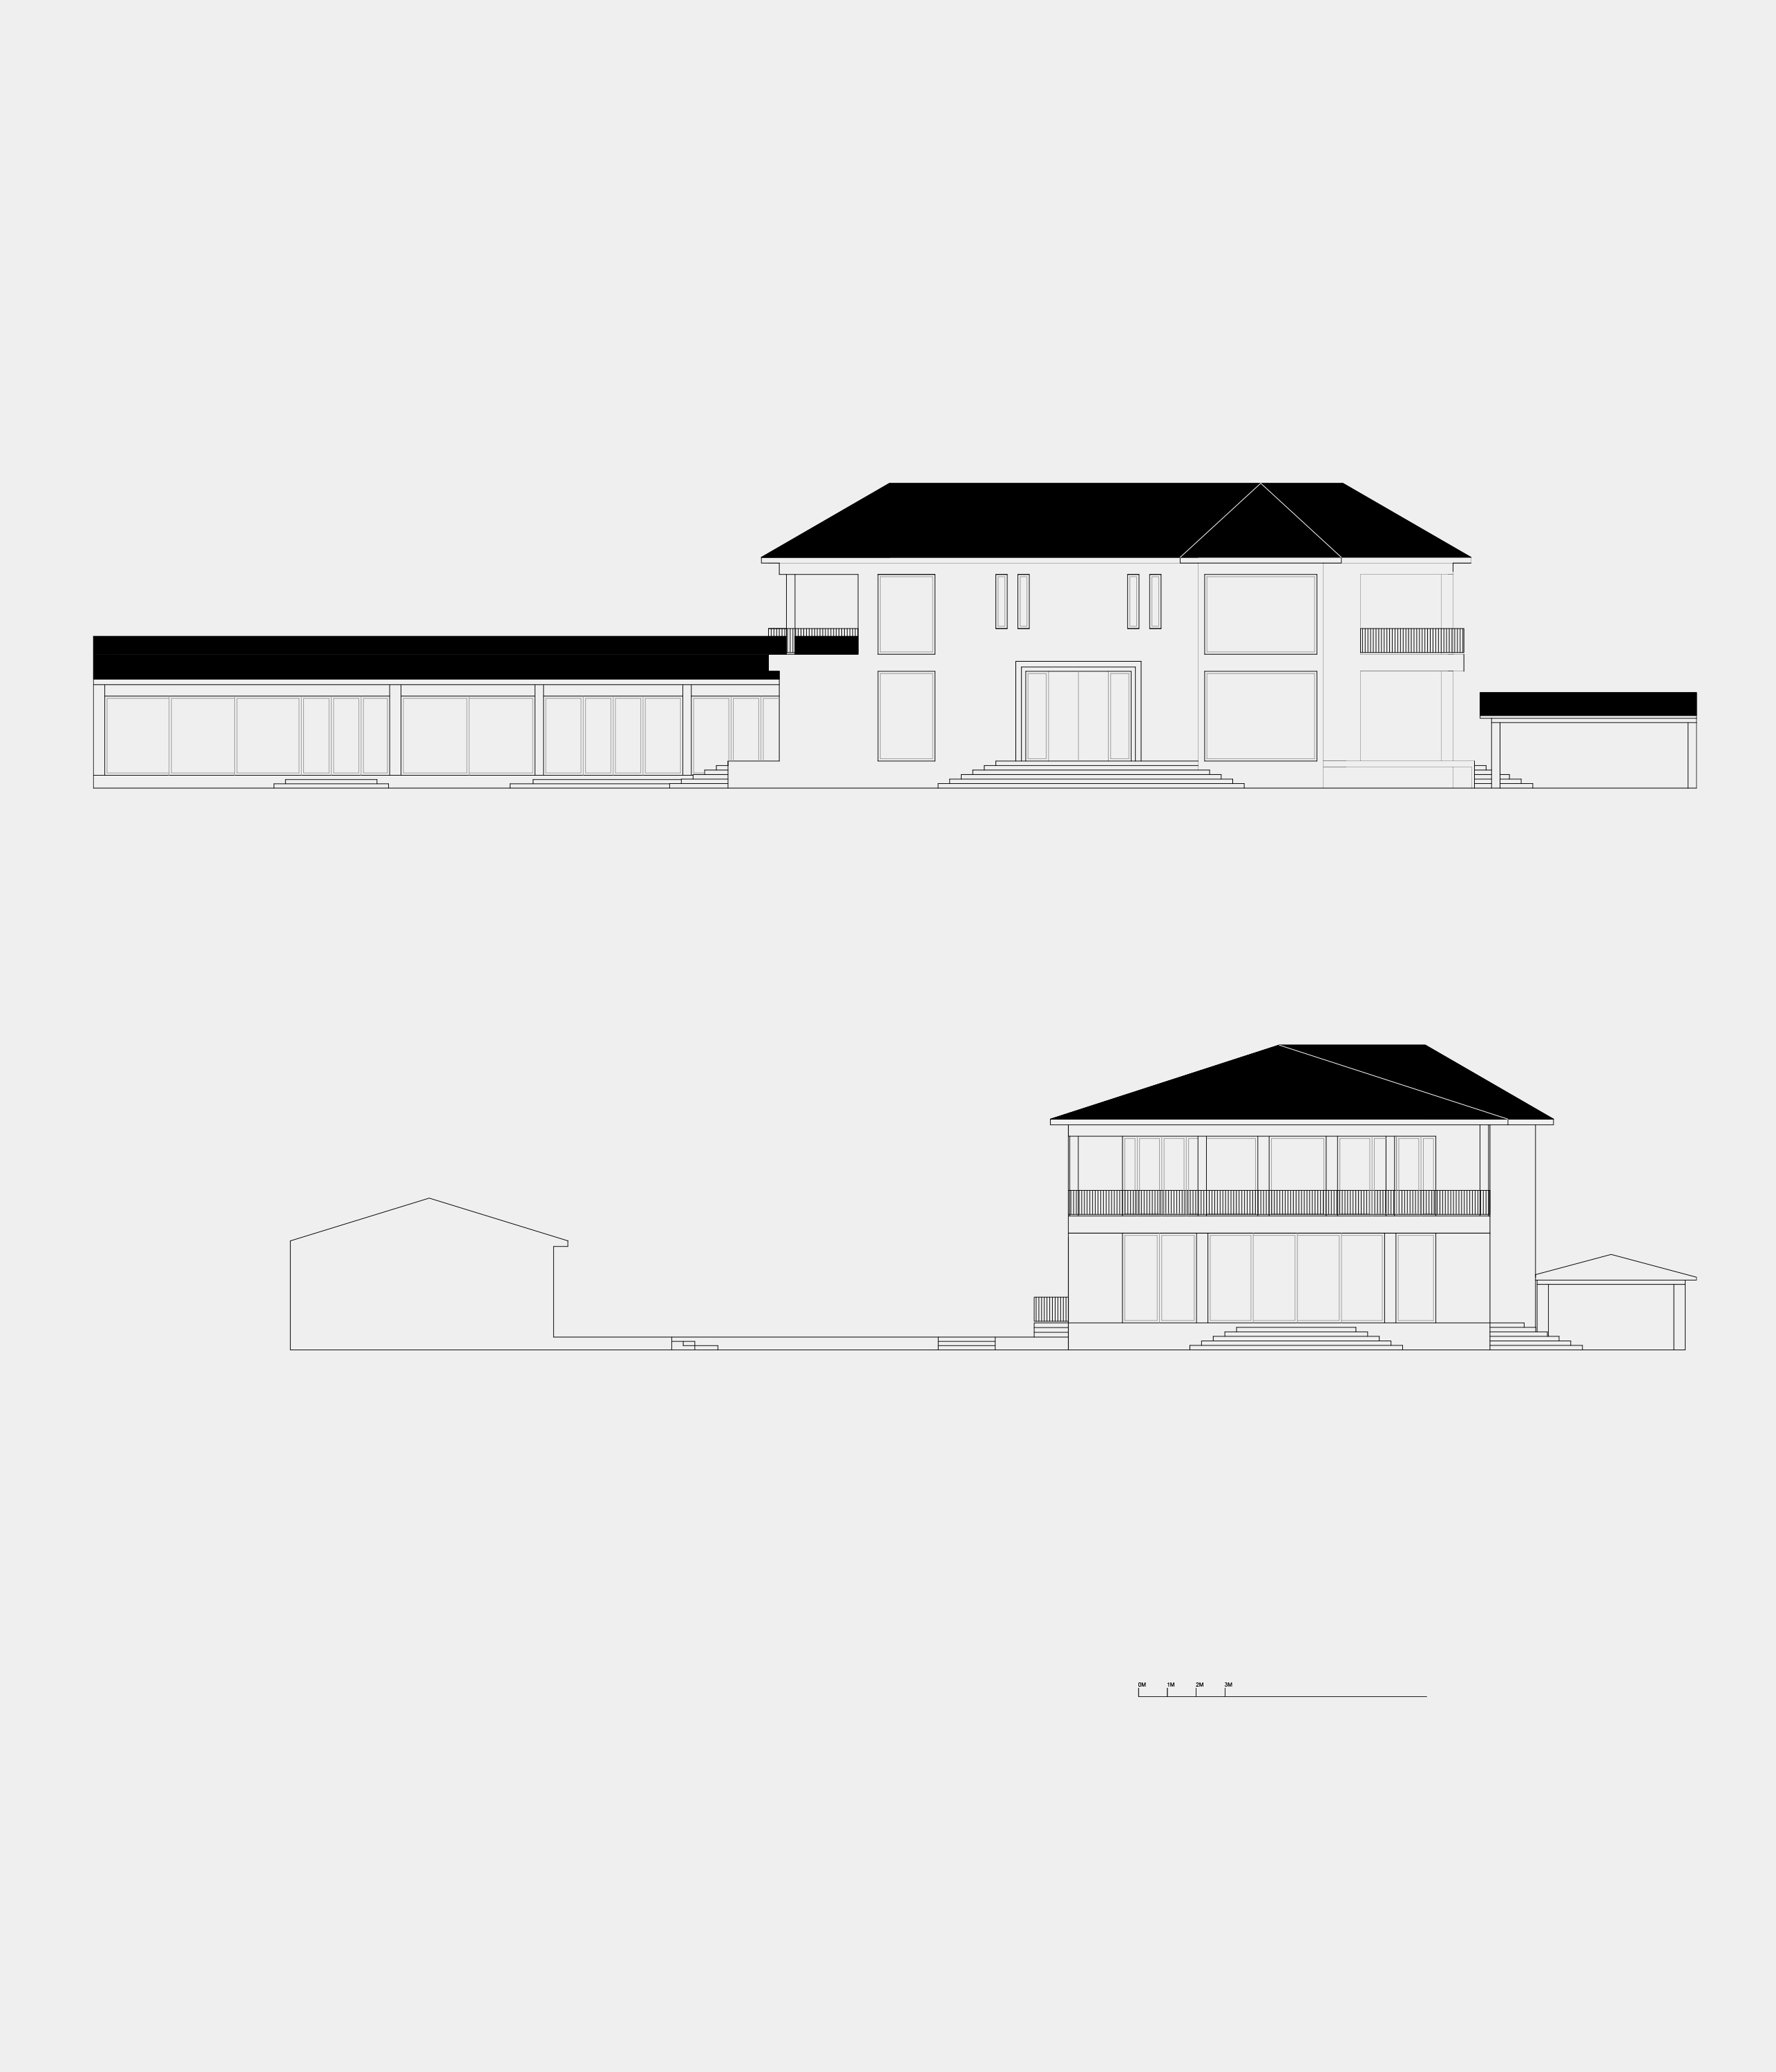 IA2152 - TOWN HOUSE - Elevations